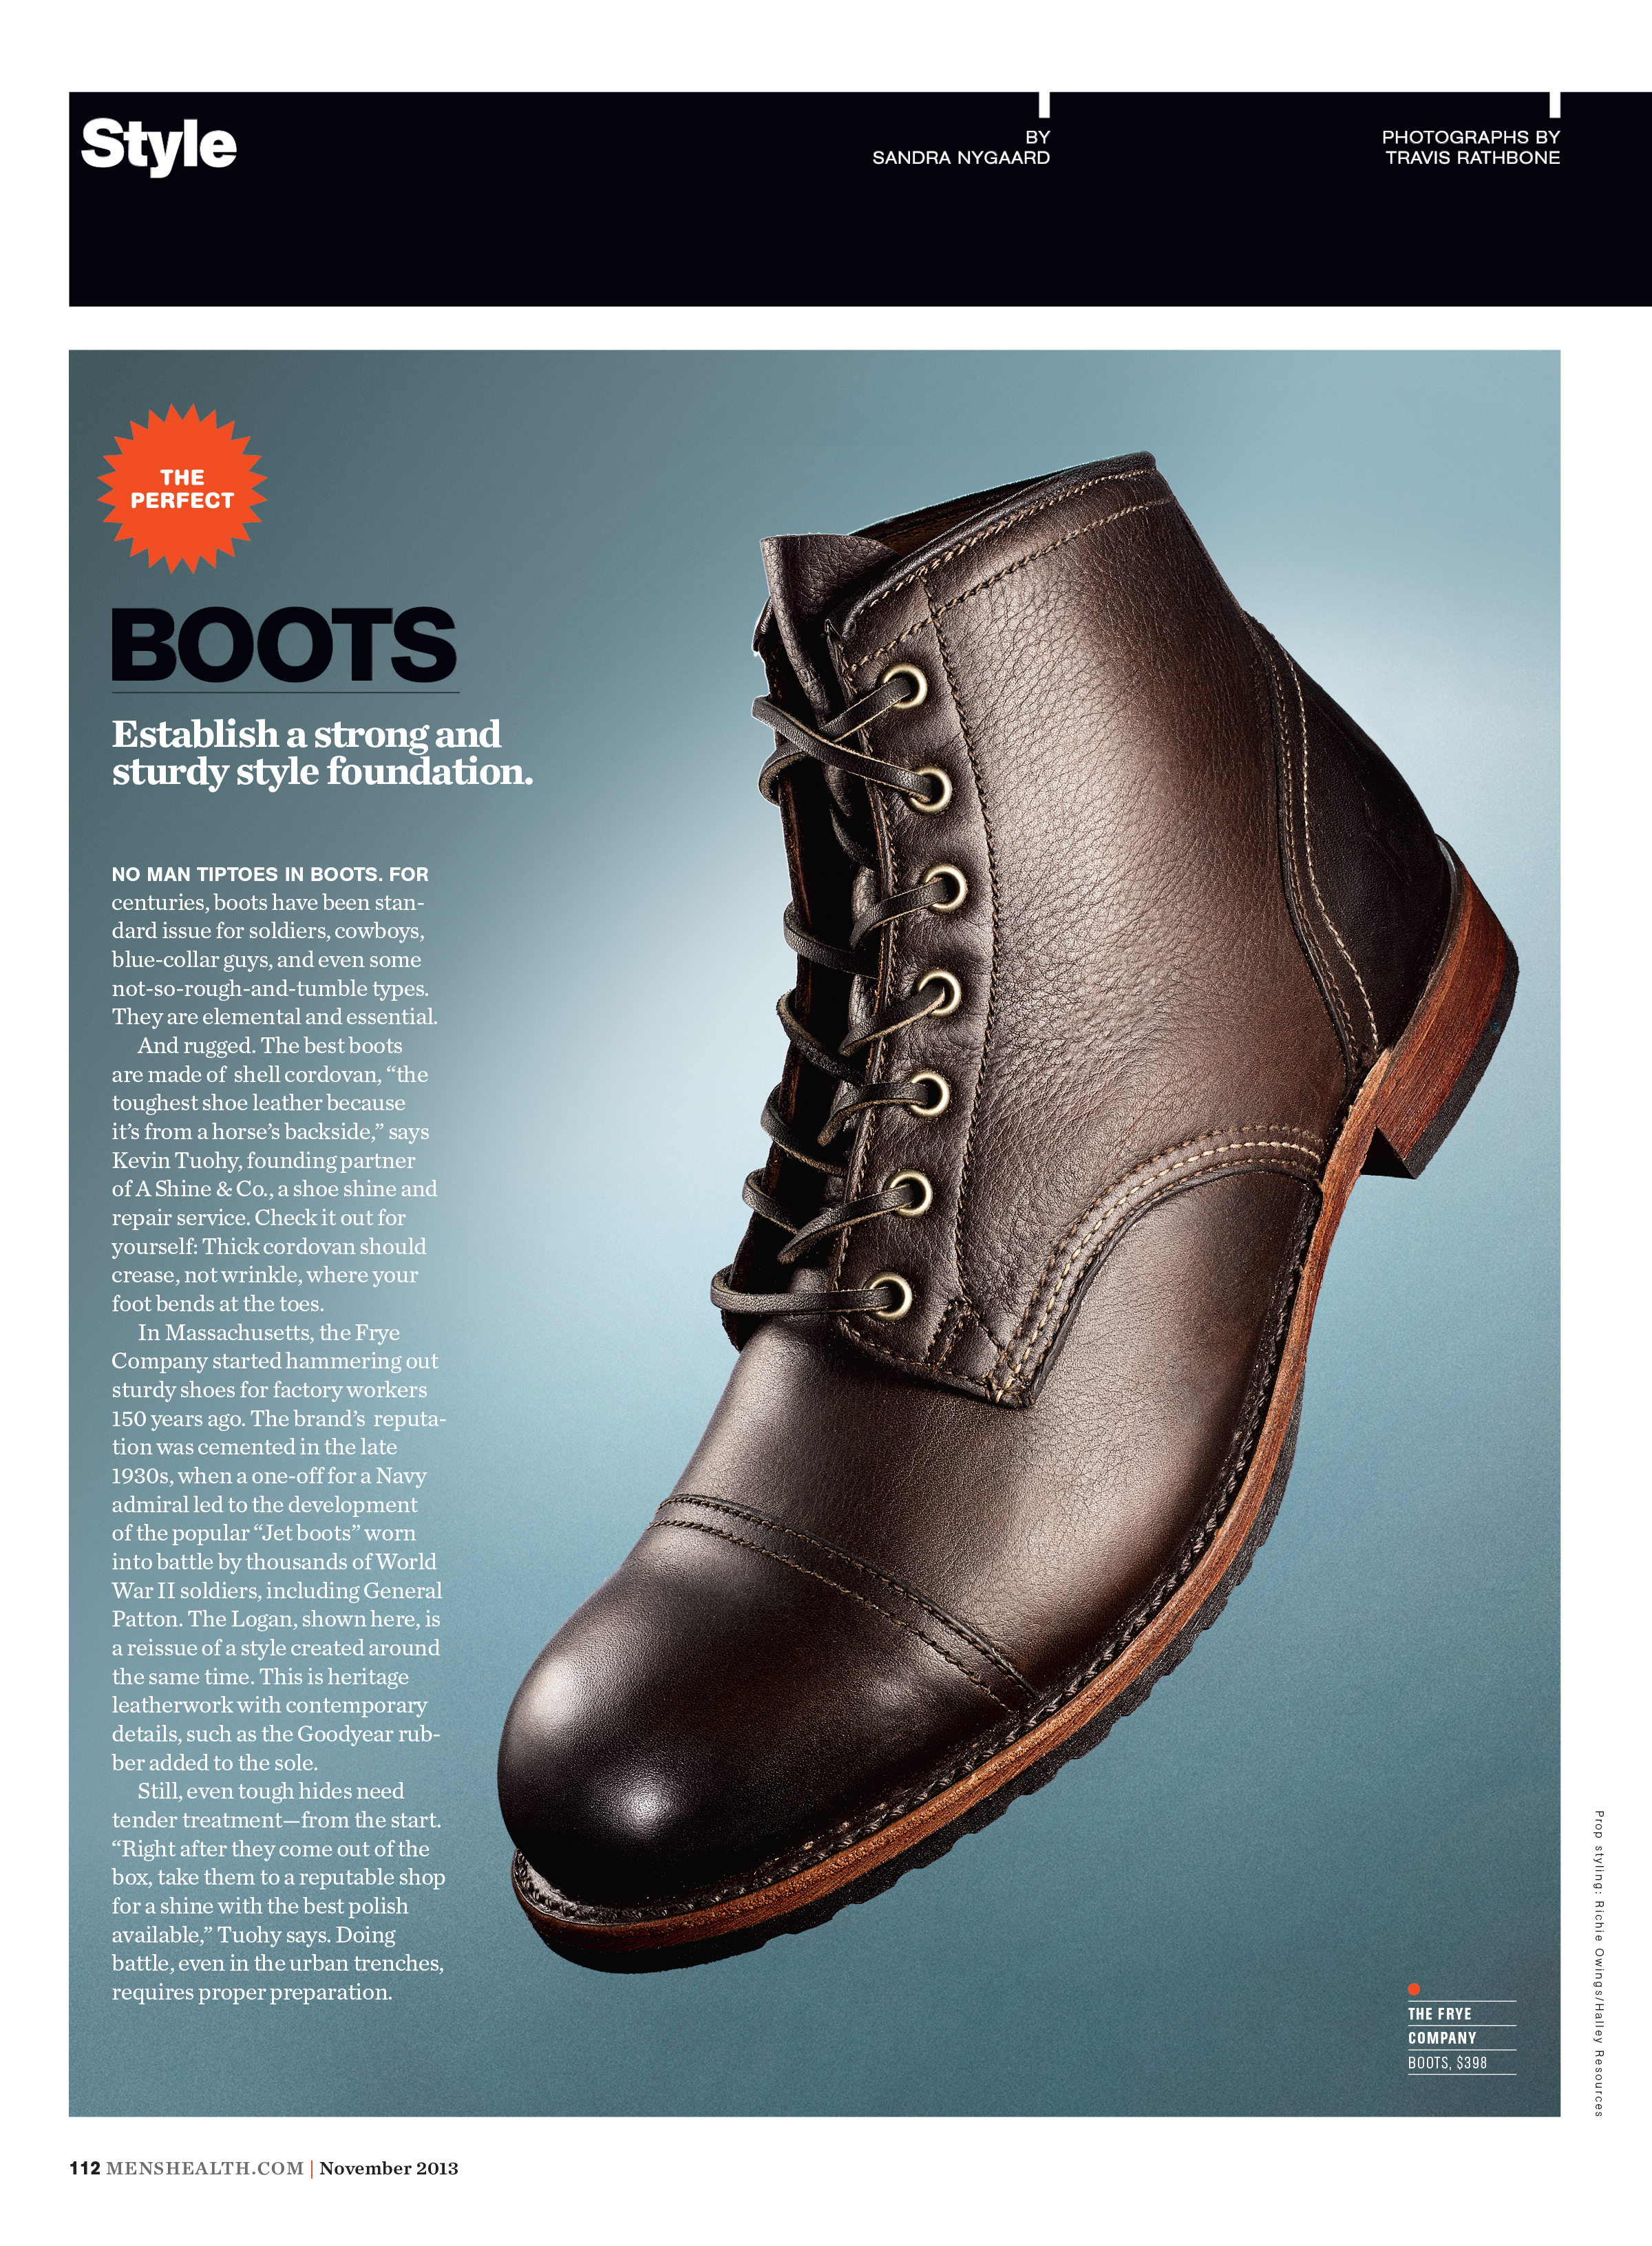 The Best: Boots